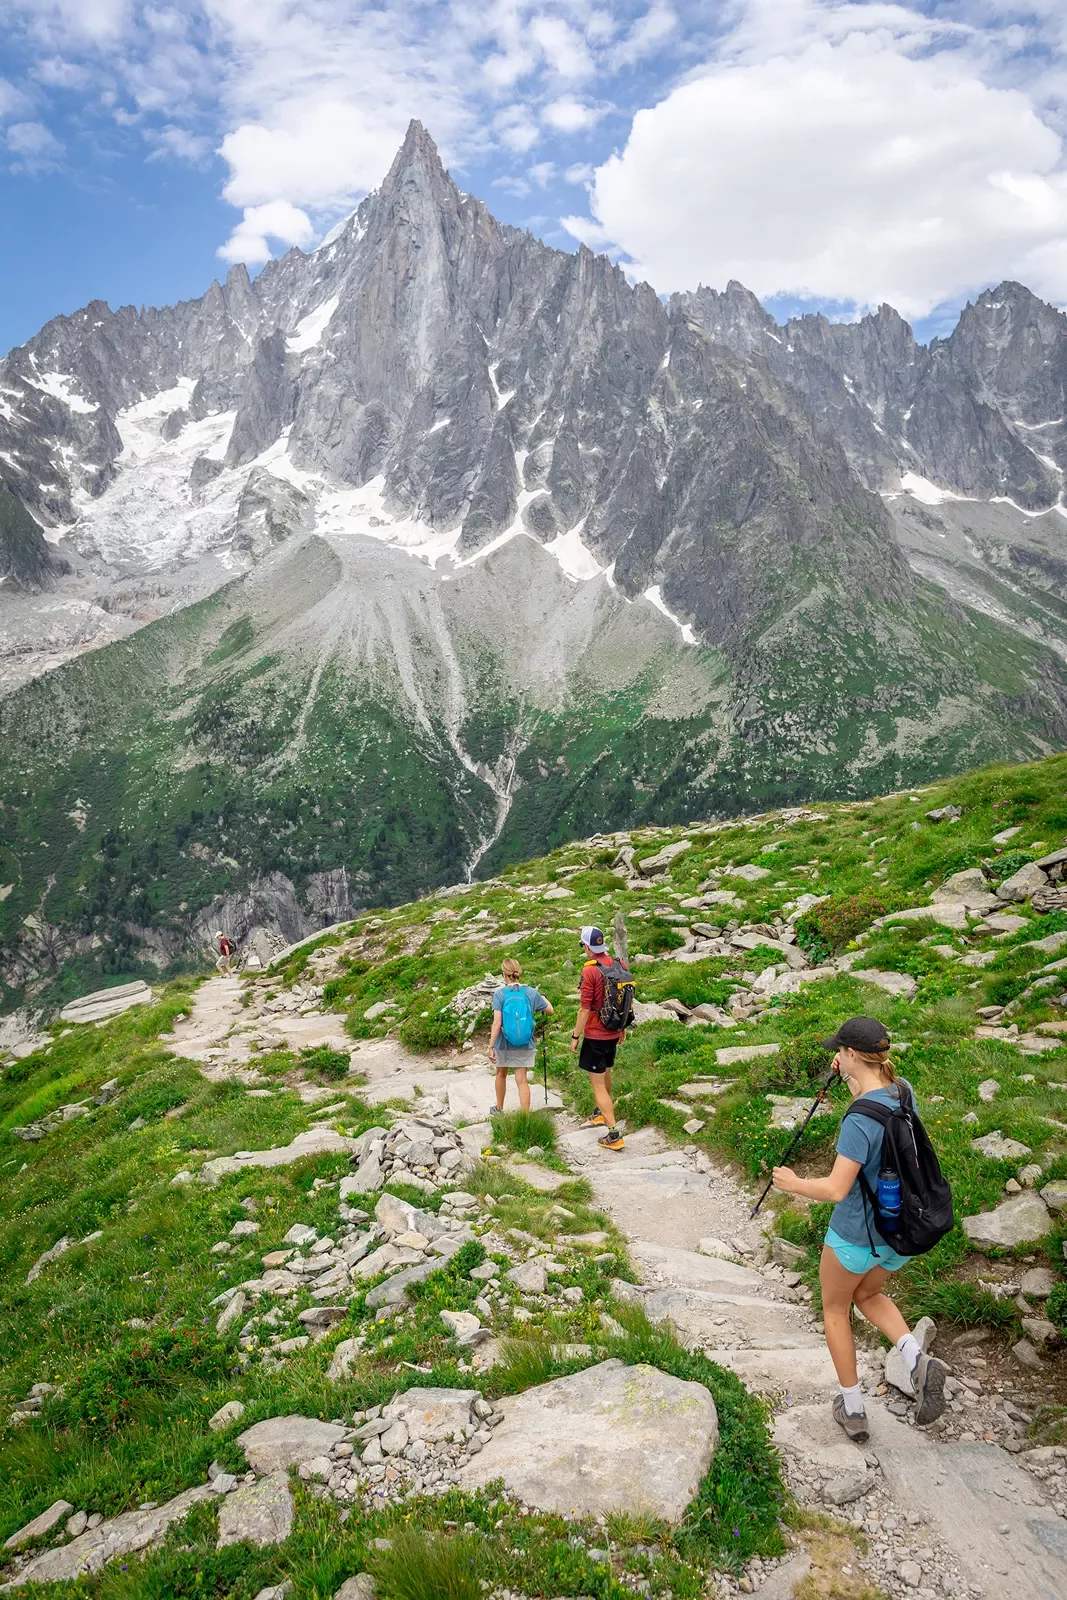 Three guests walking down mountainside, large, spiky peaks in distance.